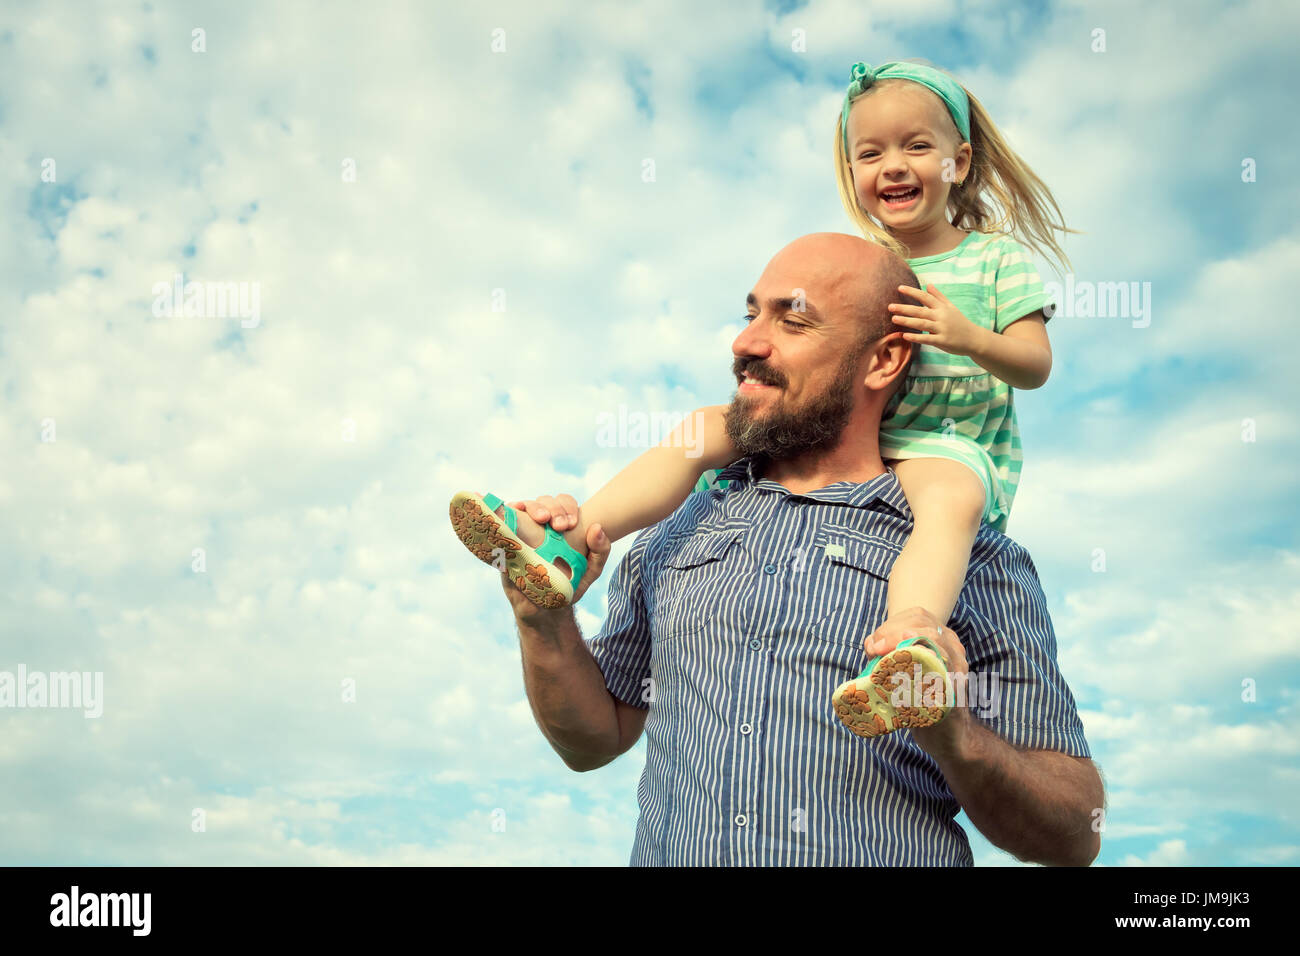 Adorable daughter and father portrait, happy family, future concept Stock Photo